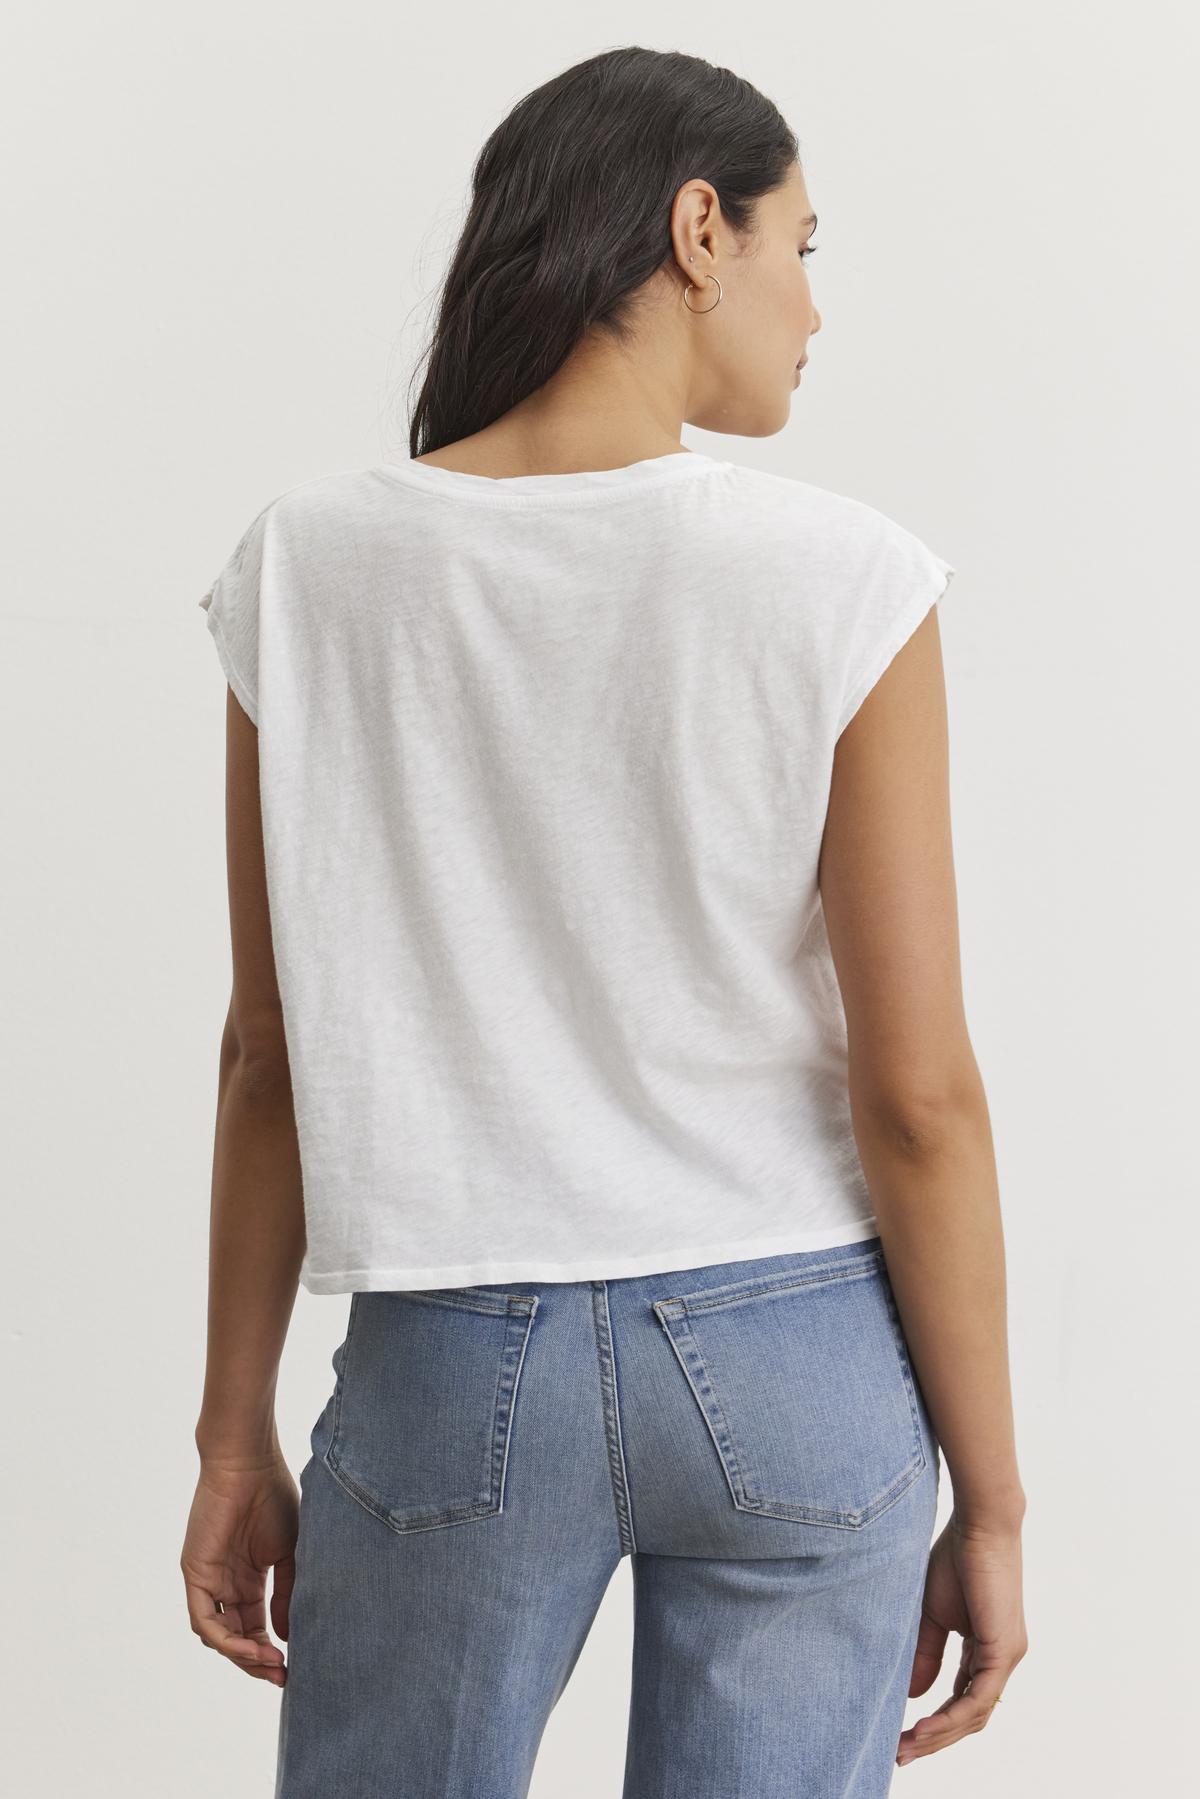 A woman with long brown hair is seen from the back, wearing a white DANIELLA CREW NECK TEE made of lightweight cotton woven fabric and light blue jeans by Velvet by Graham & Spencer. She stands against a plain white background, embodying a casual basic style.-37074420957377